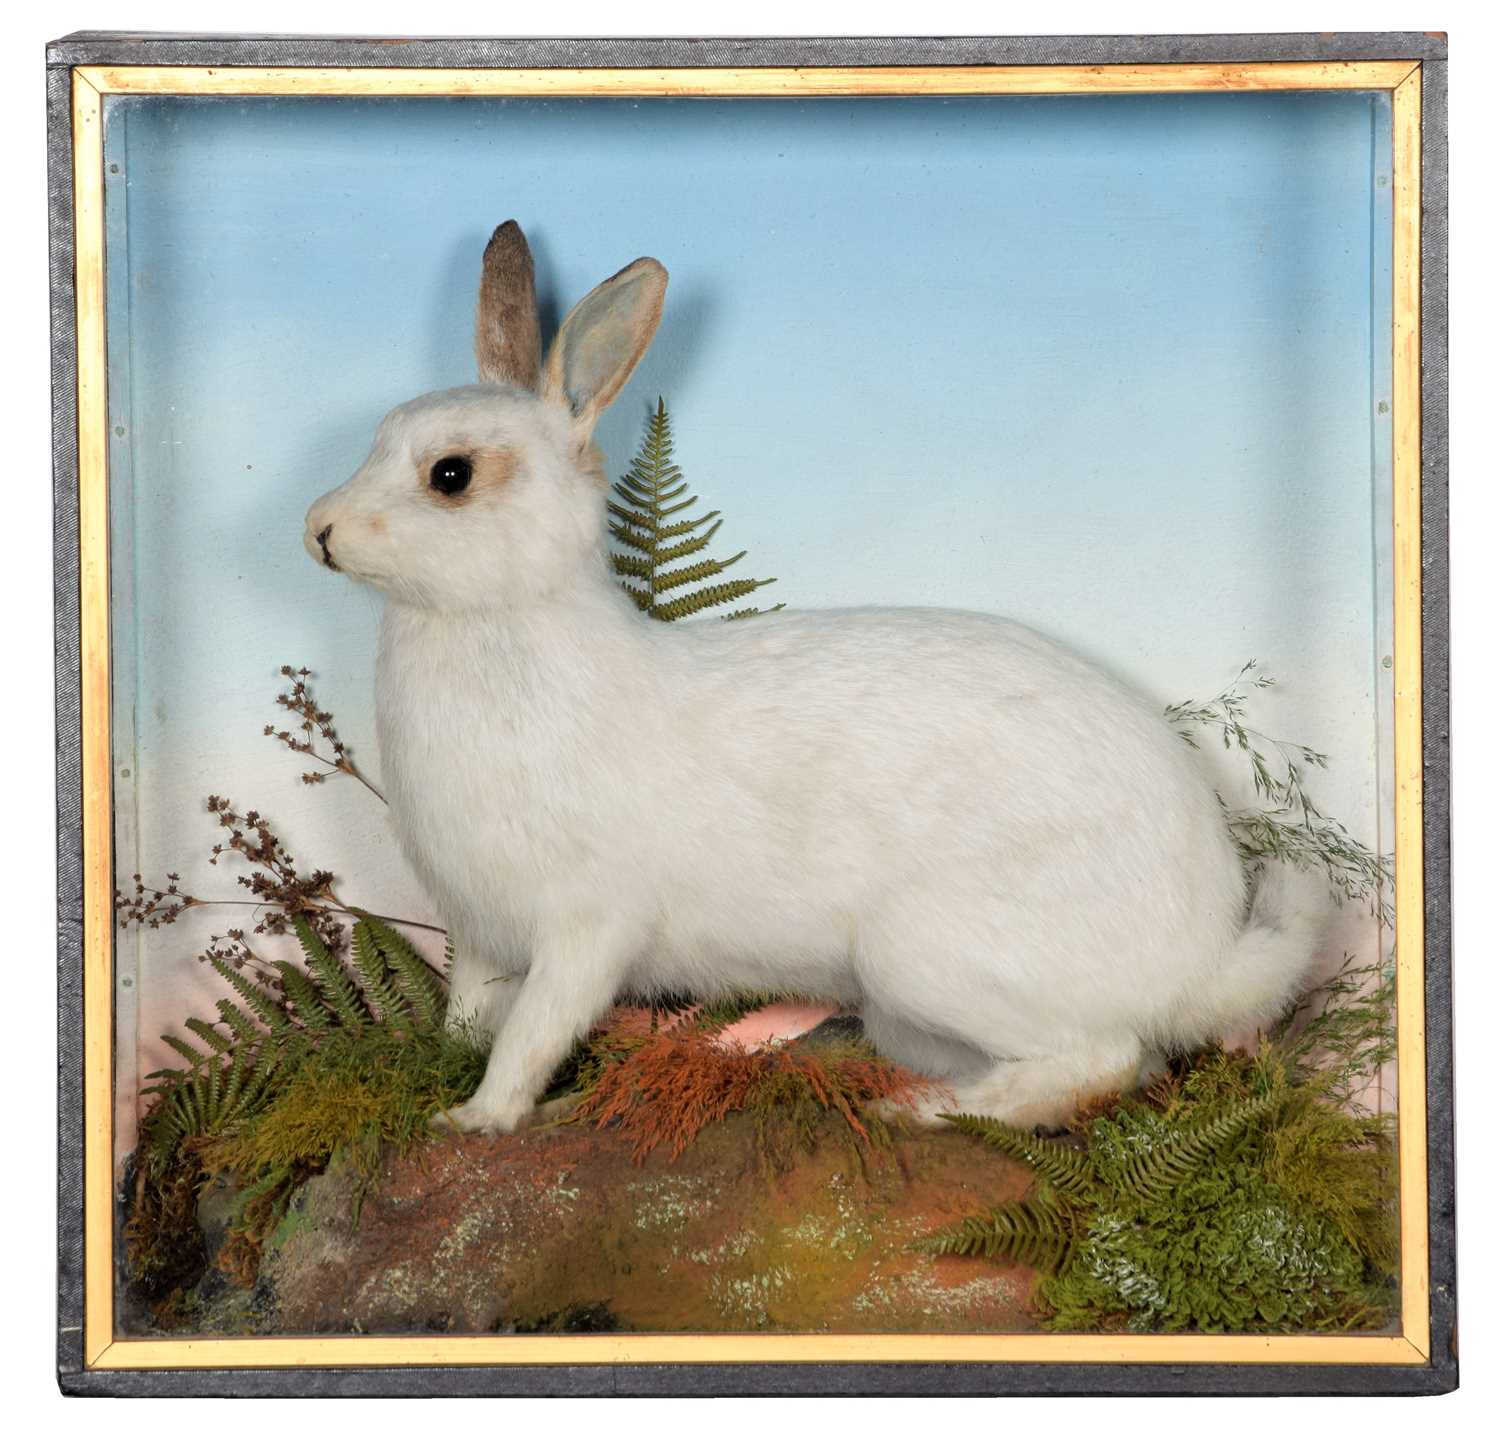 Taxidermy: A Cased Domestic White Rabbit (Oryctolagus cuniculus), circa early 20th century, by